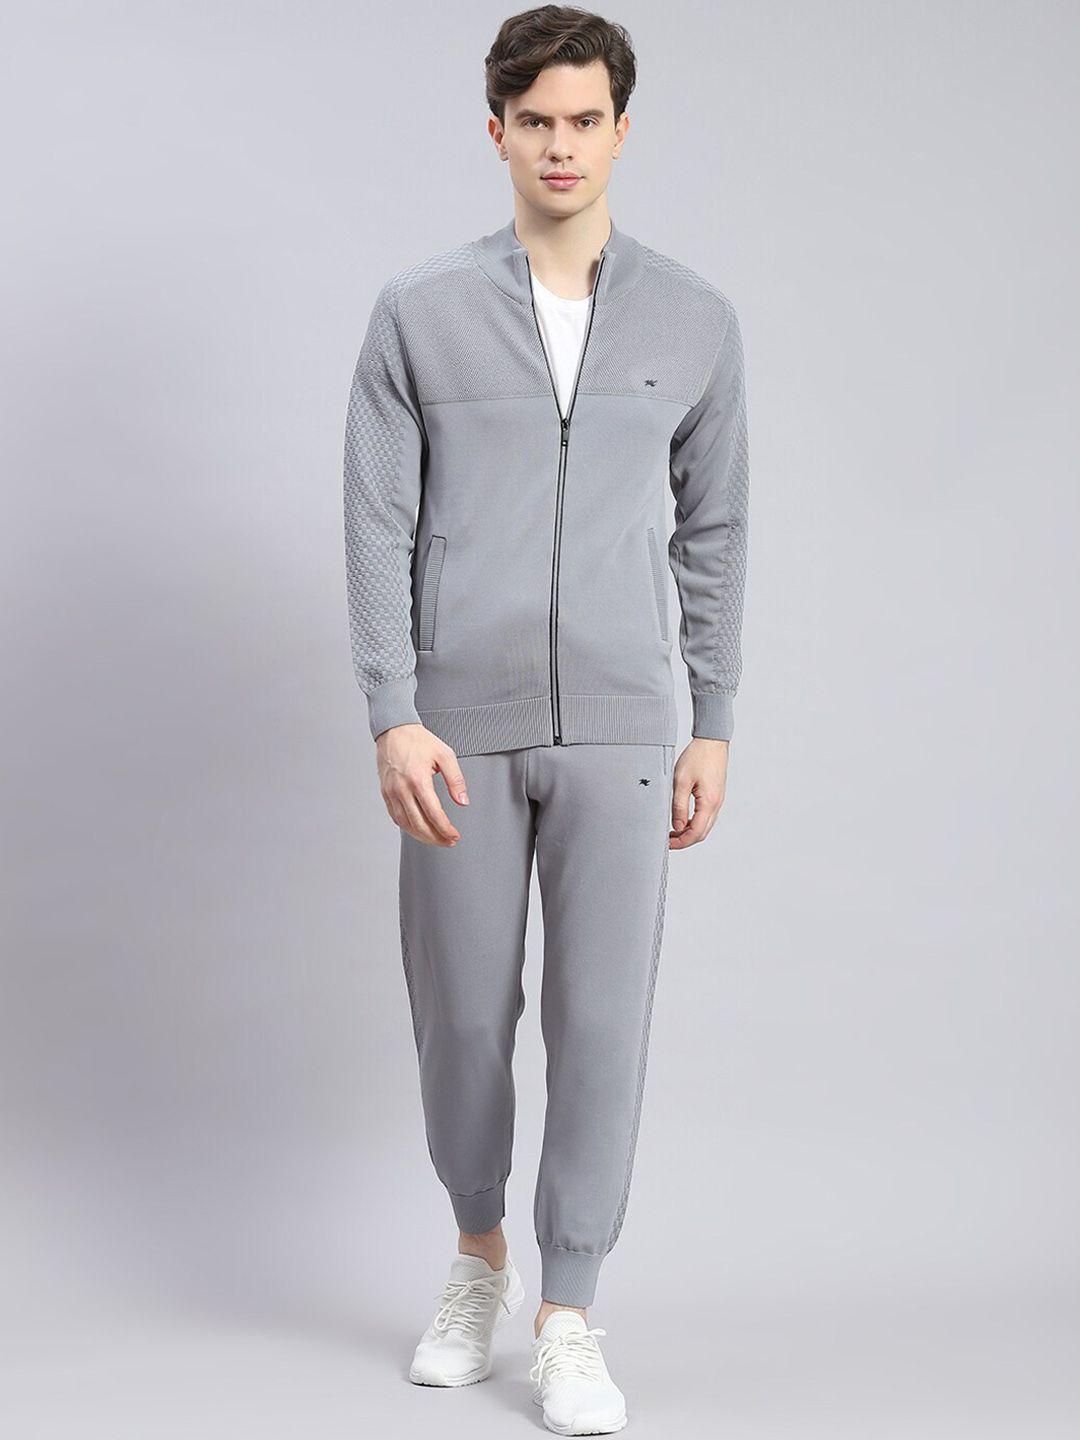 monte carlo mock collar mid-rise tracksuit